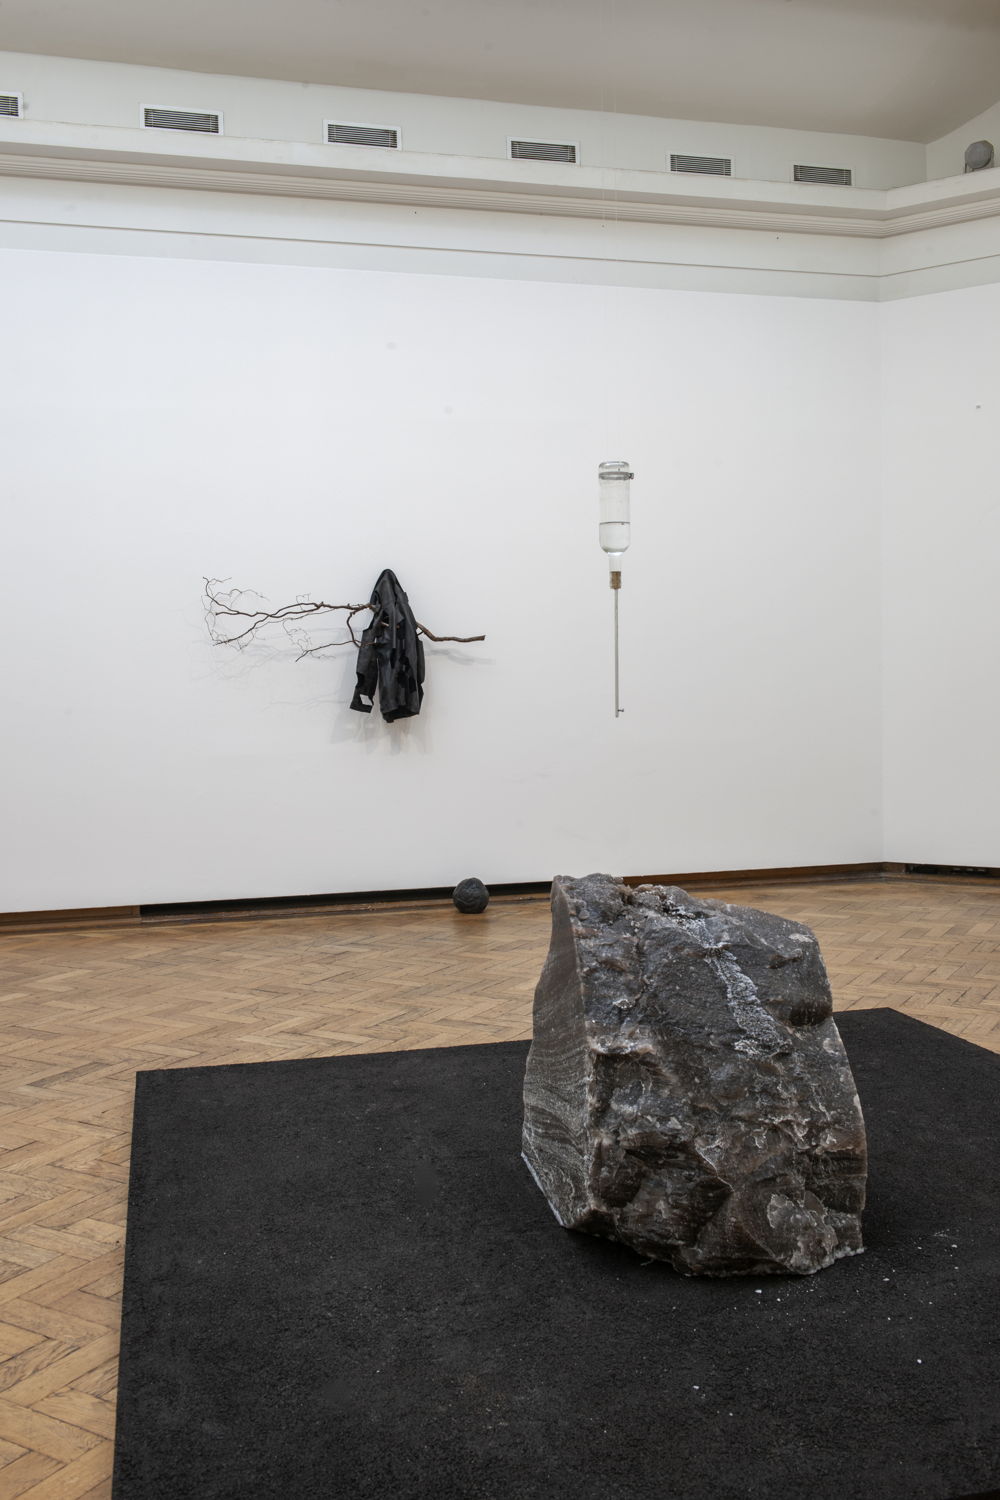 Installation view of the exhibition Michel François, Contre Nature at Bozar, Brussels. Photo by Philippe de Gobert